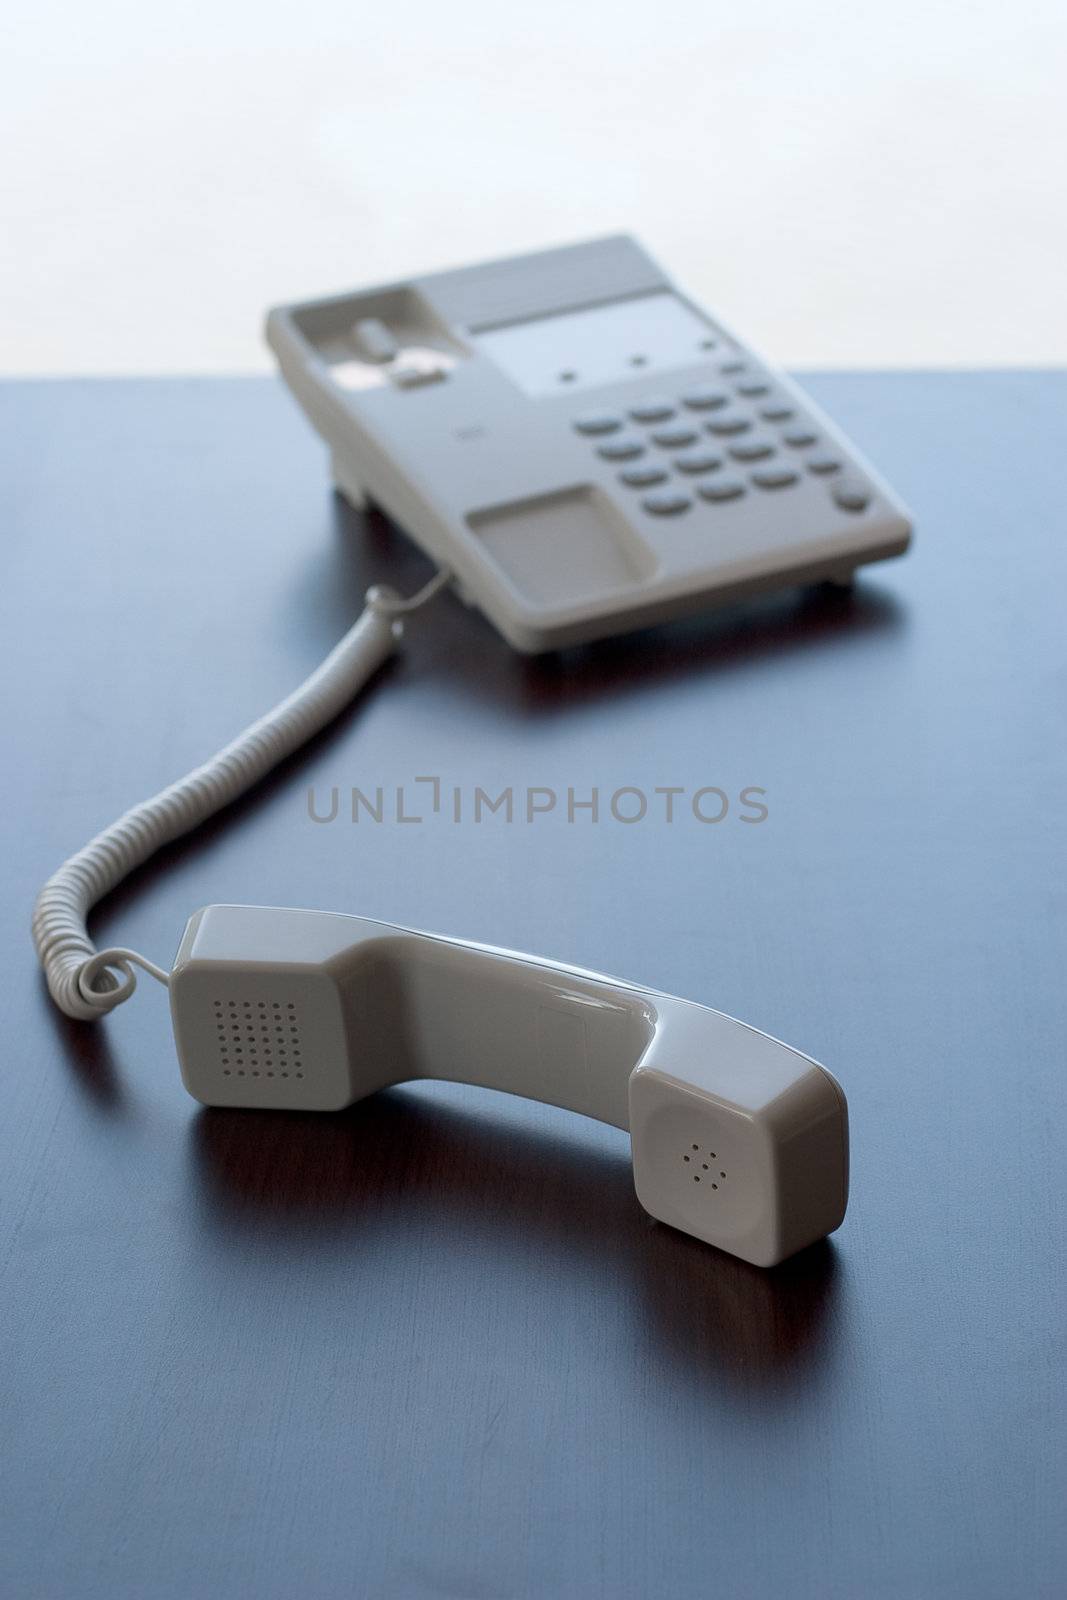 The white phone on the table. The concept of communication between people.